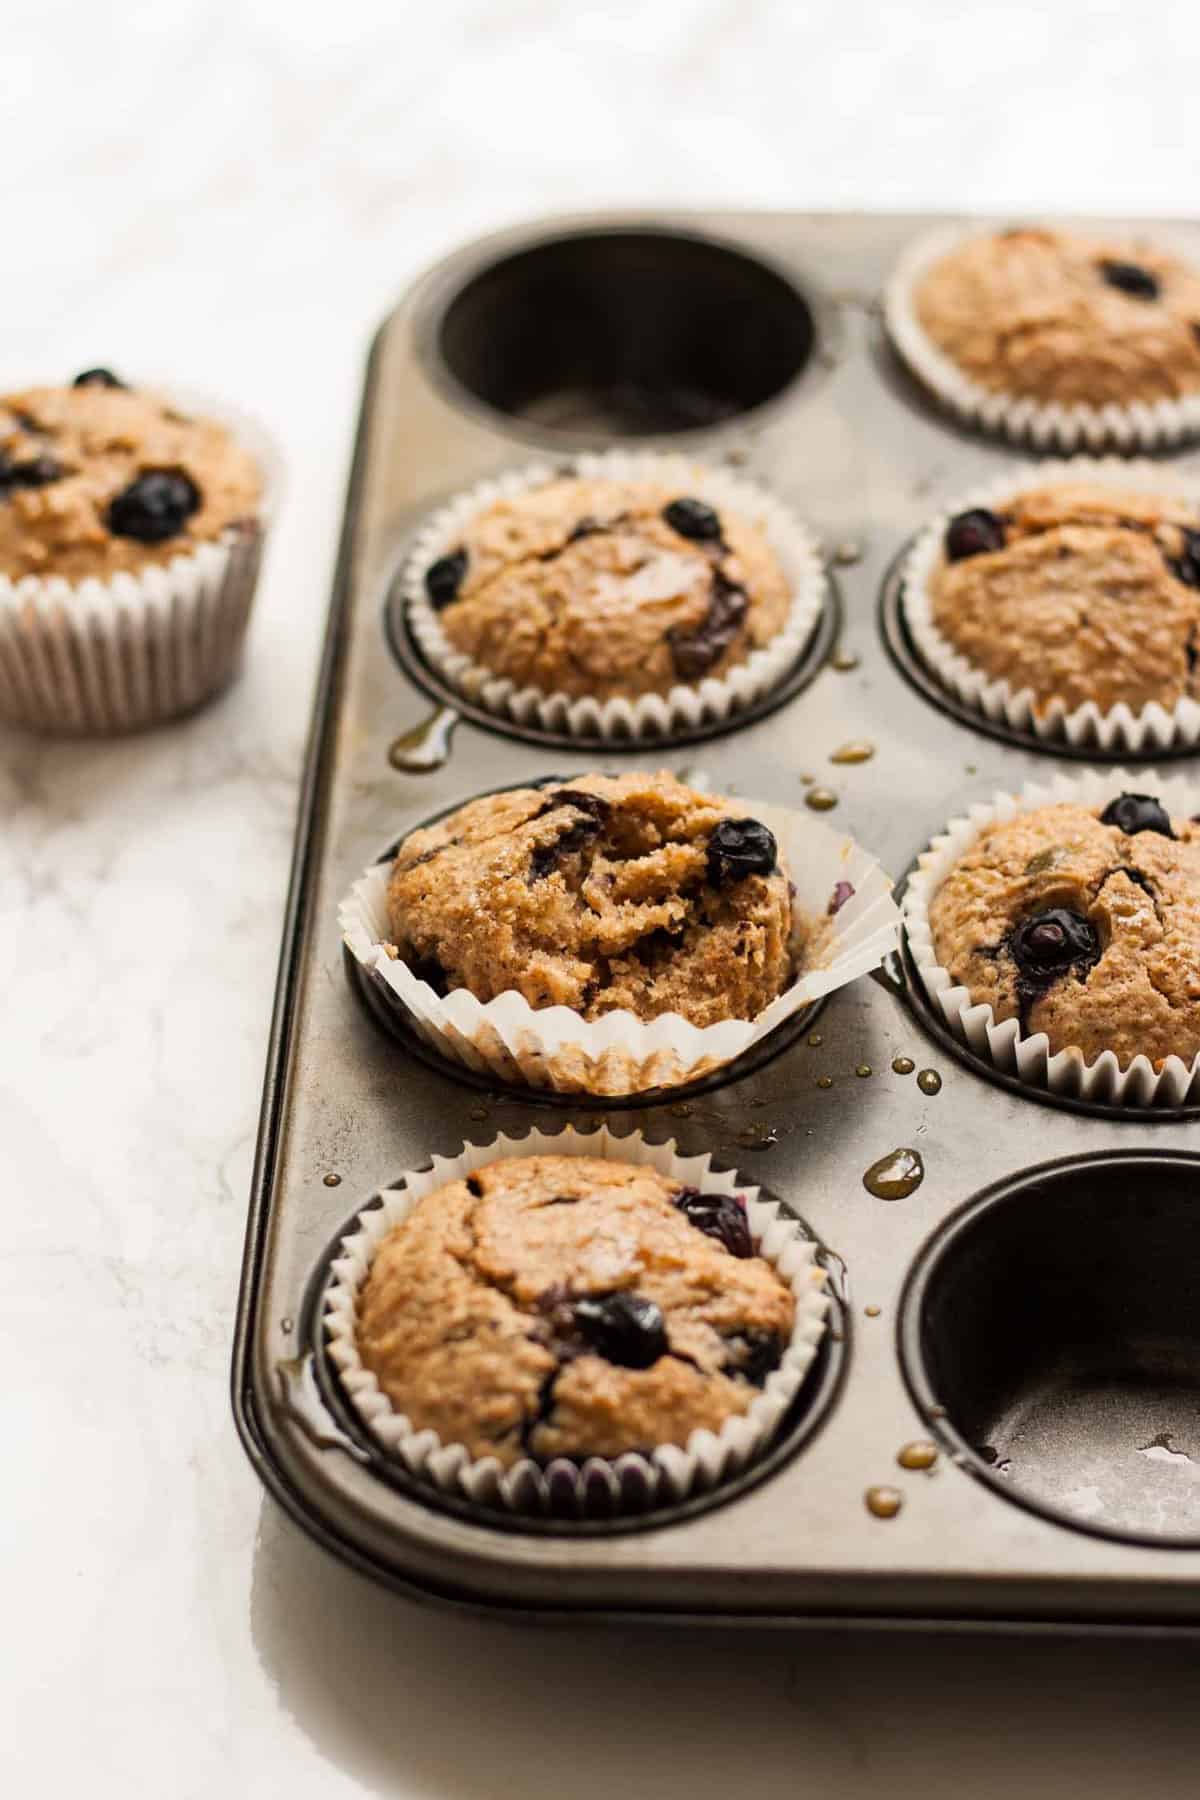 Quinoa Spelt Blueberry Breakfast Muffins - these easy breakfast muffins are full of goodness and taste amazing with a drizzle of warmed maple syrup! | eatloveeats.com